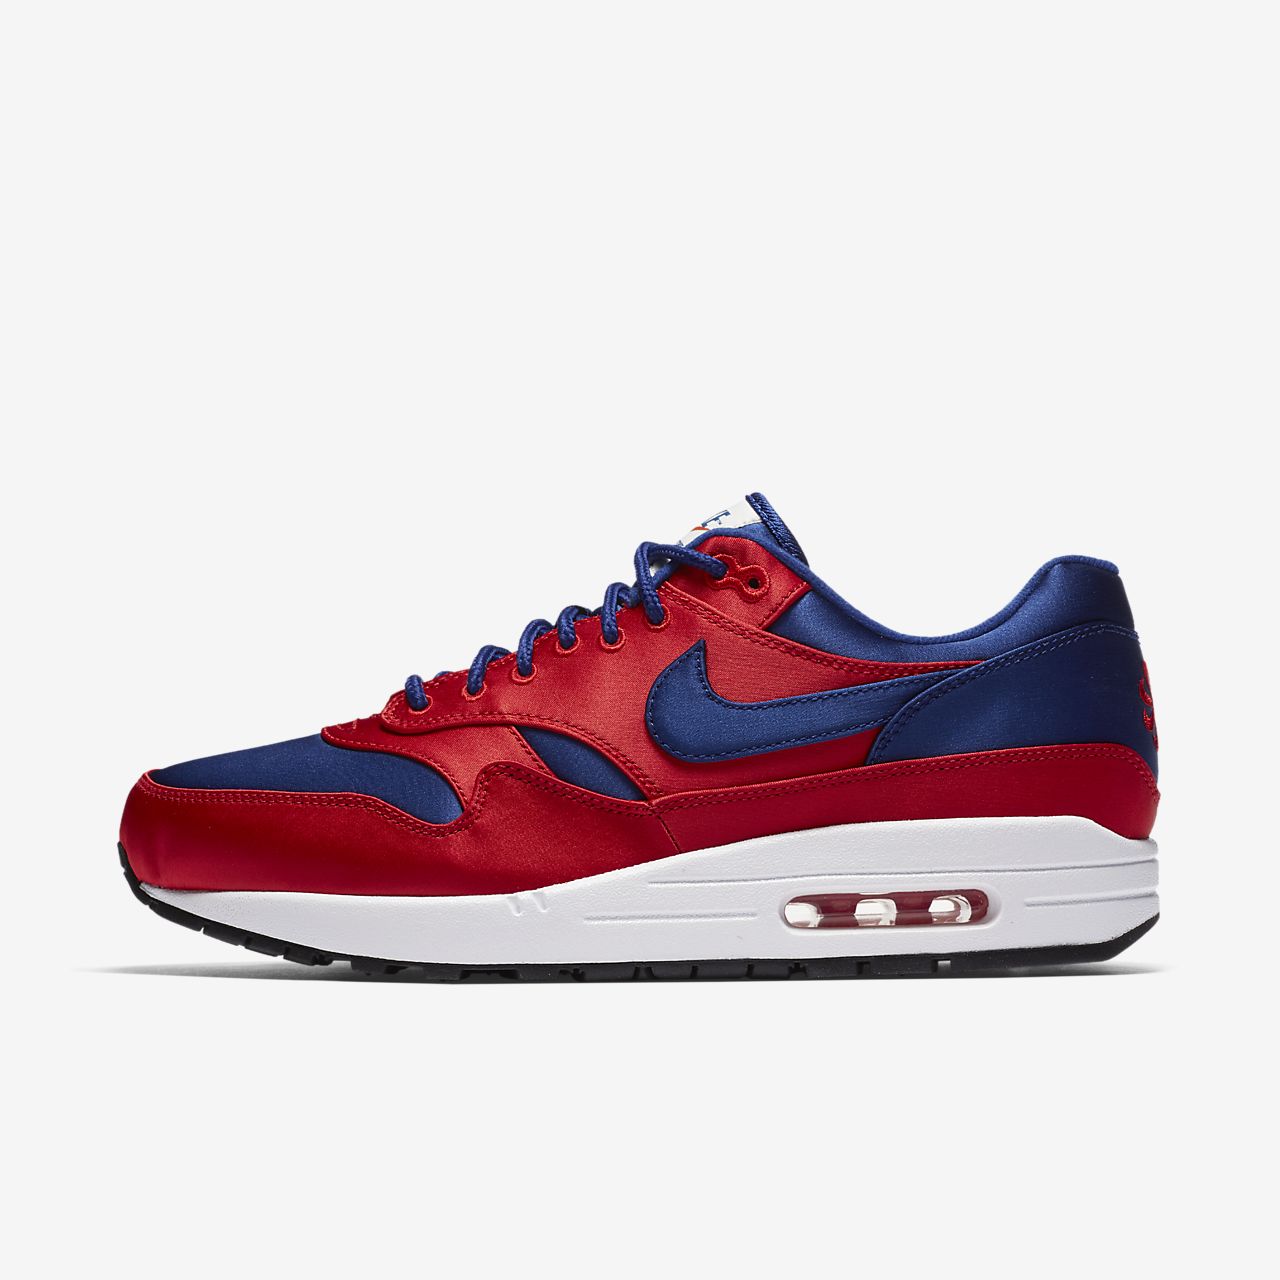 Nike Air Max 1 Ultra 2.0 Essential， Chaussures de Running Homme， Rouge (University